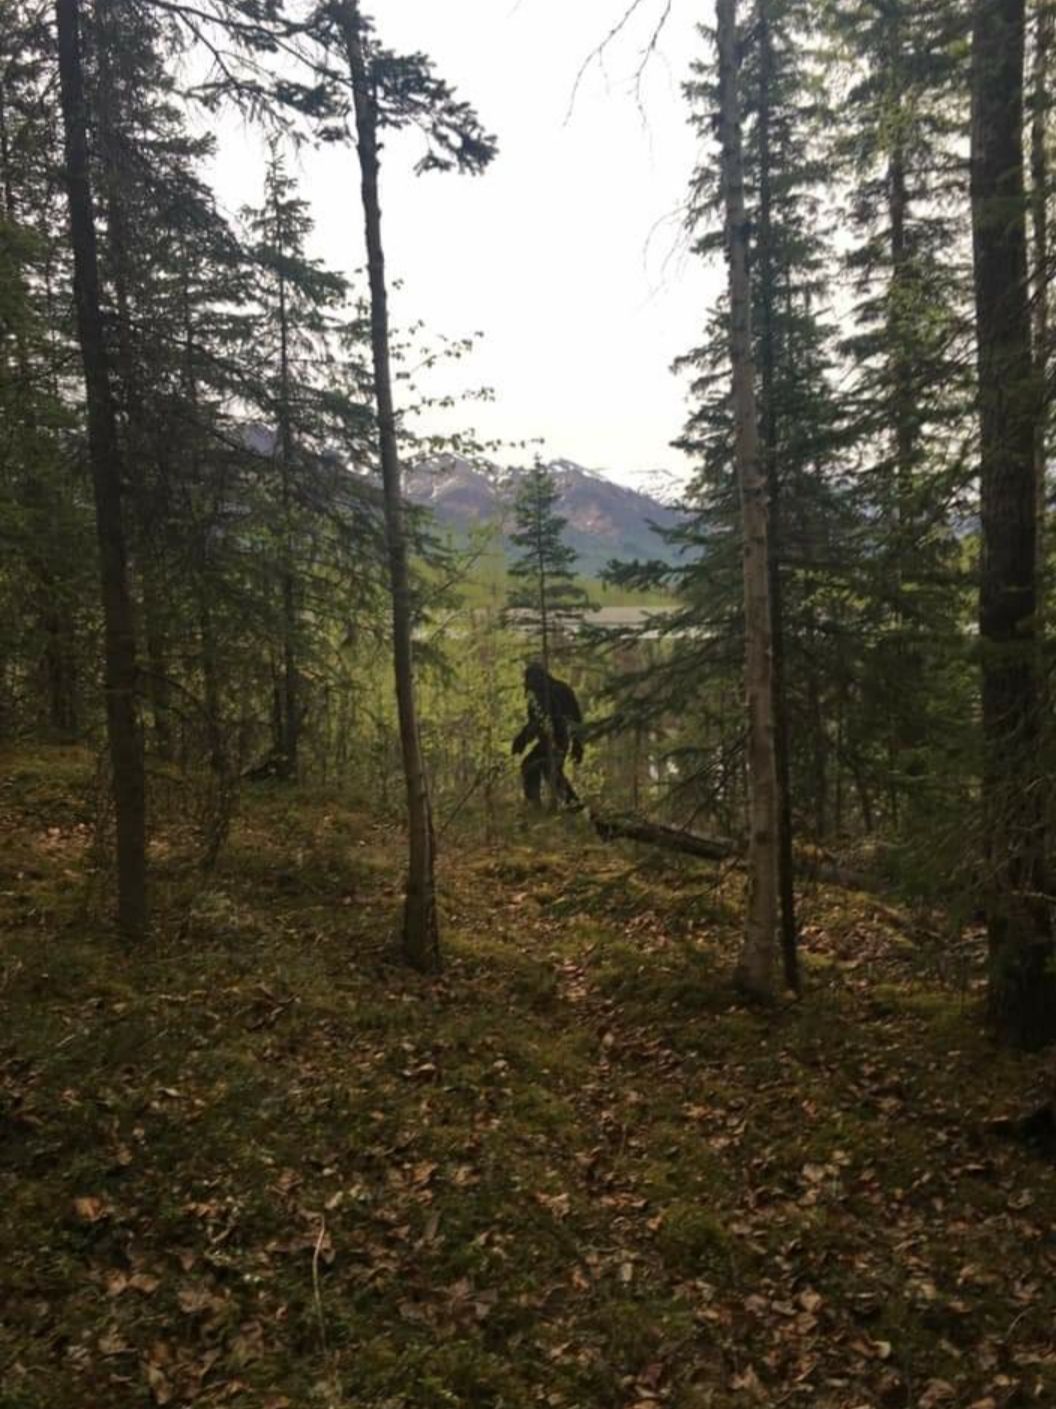 Someone keeps leaving this cutout of Bigfoot around town. This time he was on a trail.